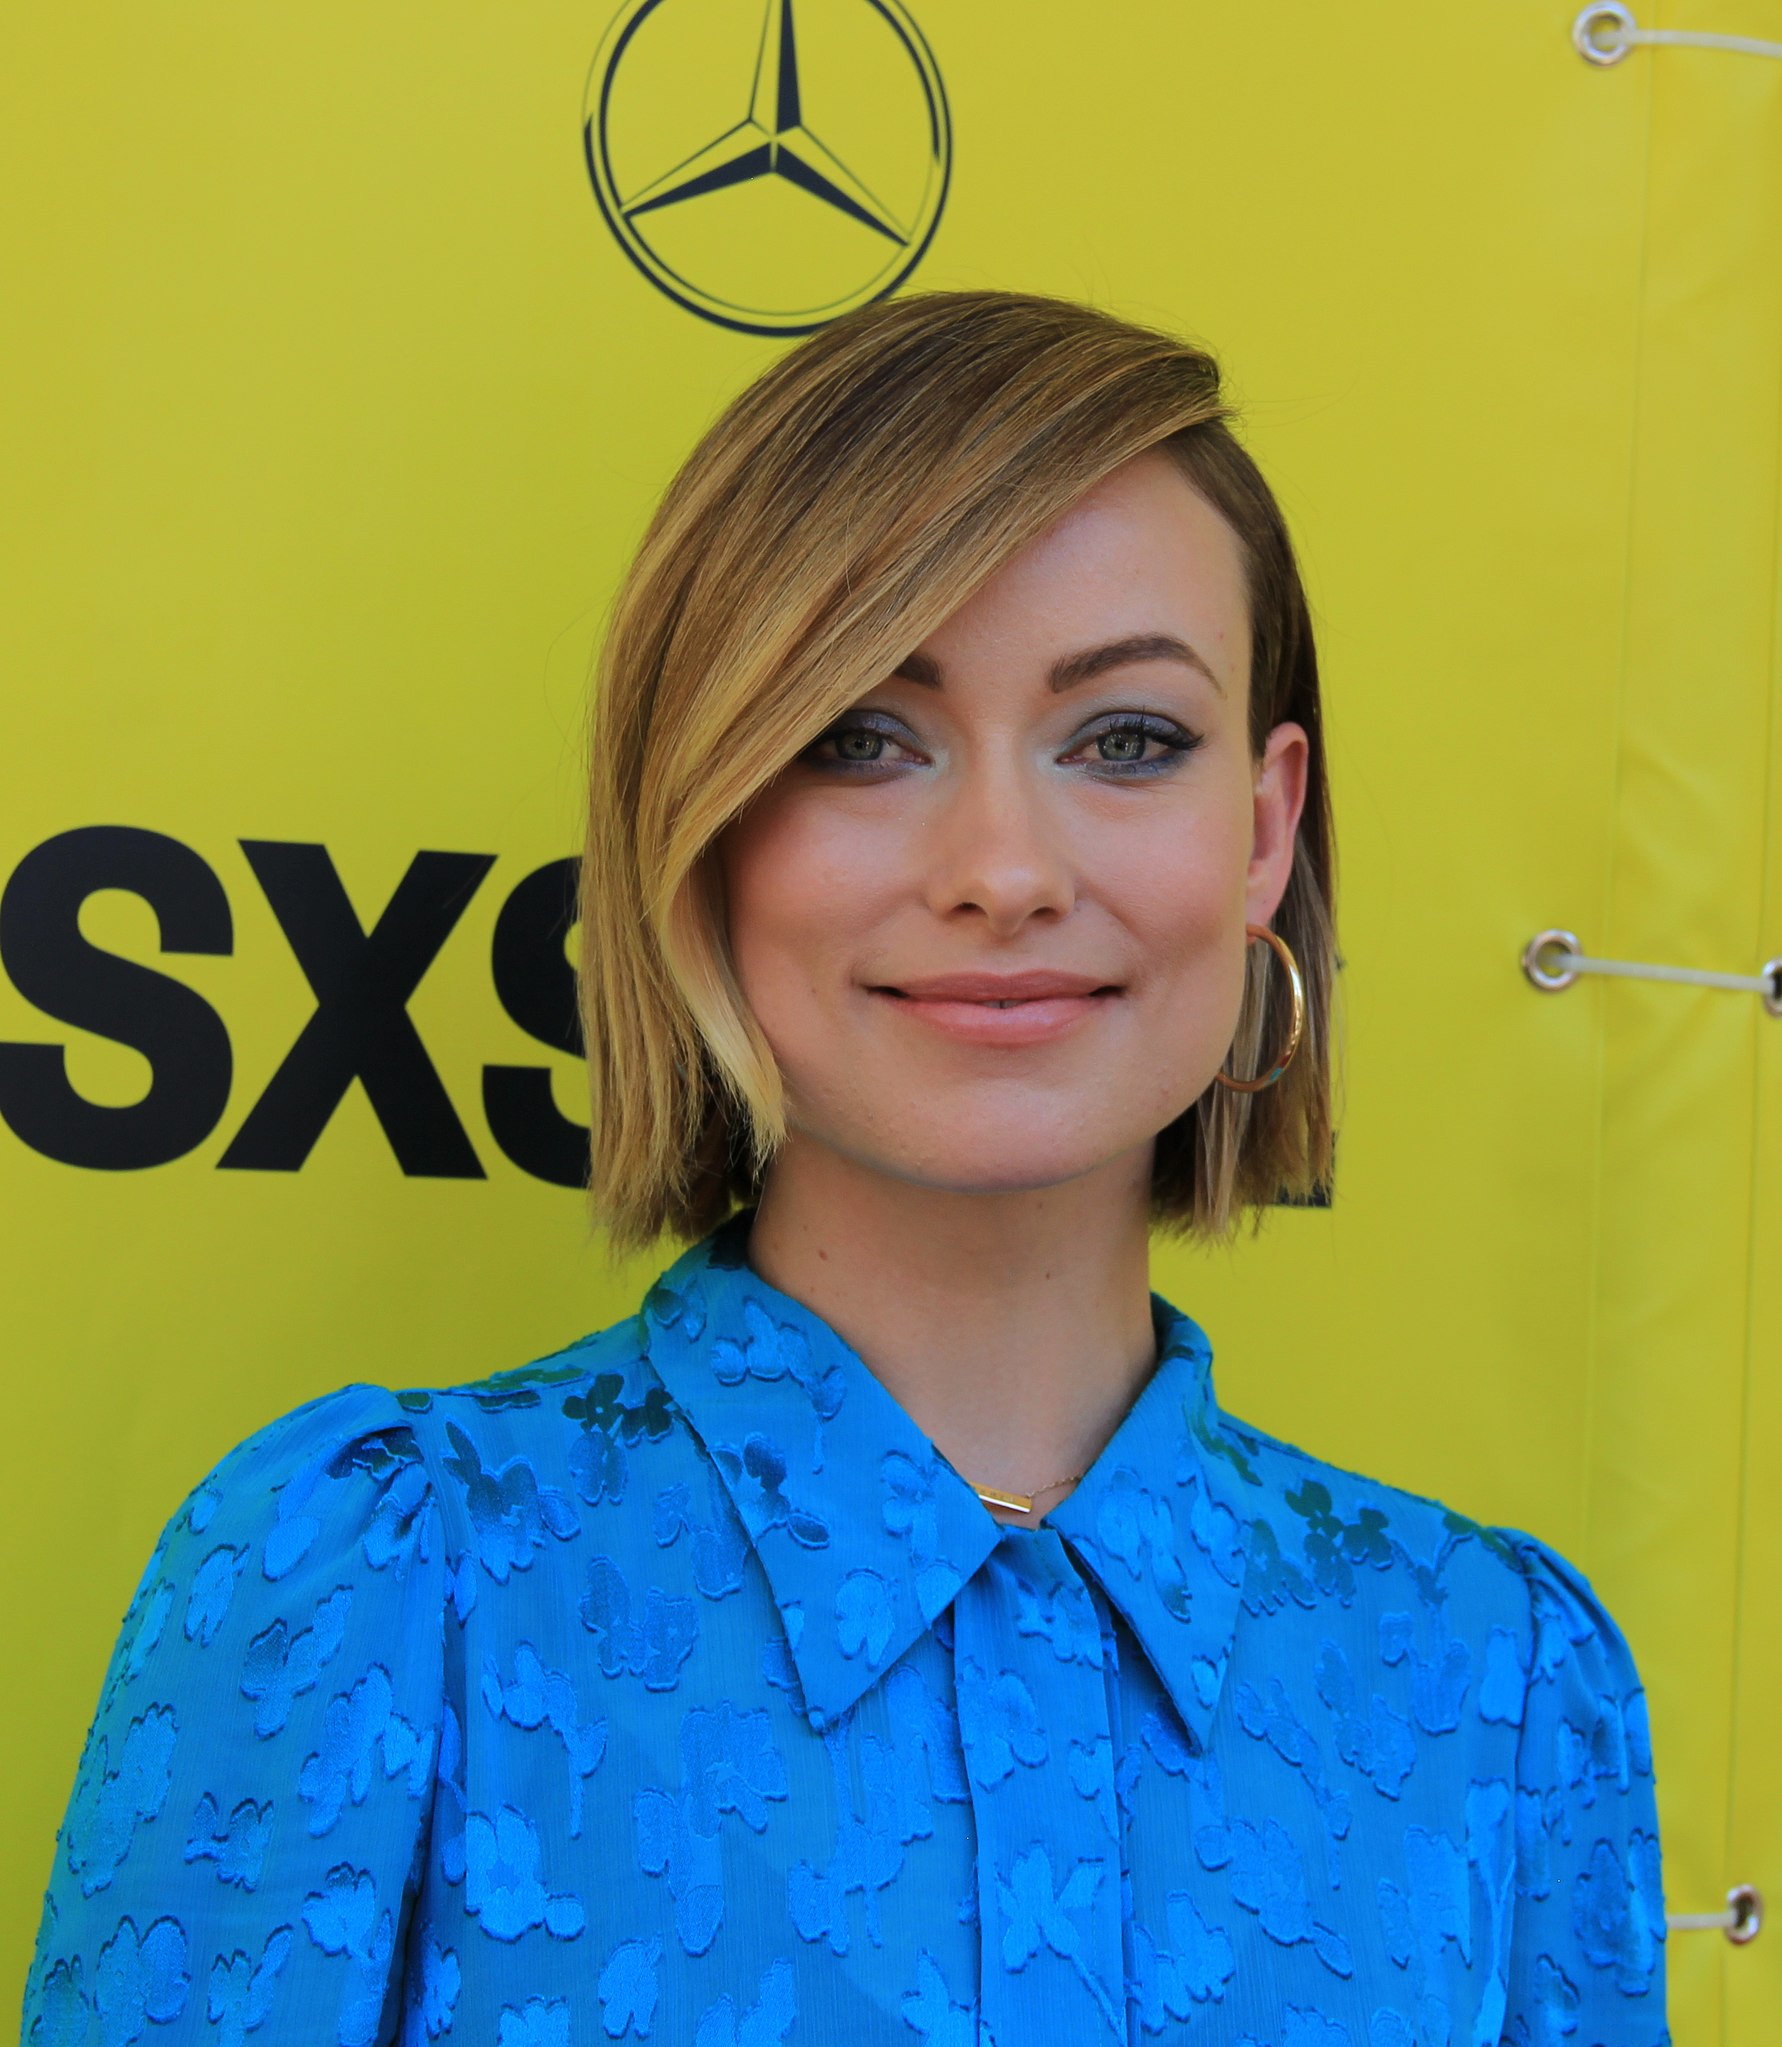 Olivia Wilde at the Red Carpet Premiere of A Vigilante during SXSW 2018 (40704996872) (cropped) 2.jpg